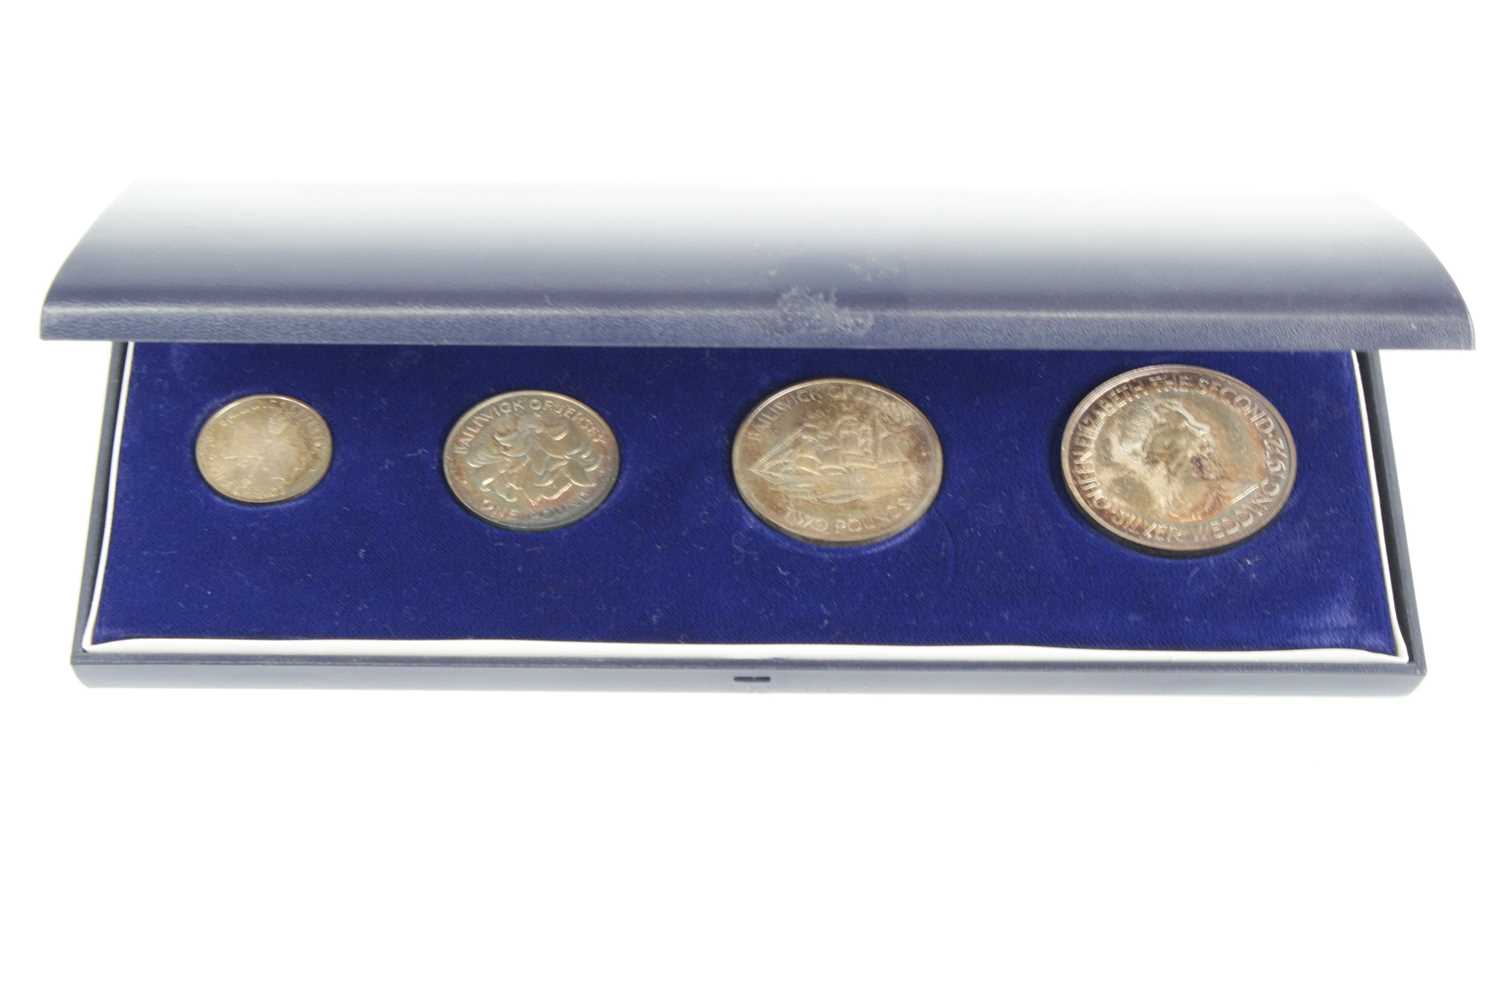 Bailiwick of Jersey, 1972 Royal Wedding Anniversary silver four coin proof set, cased with